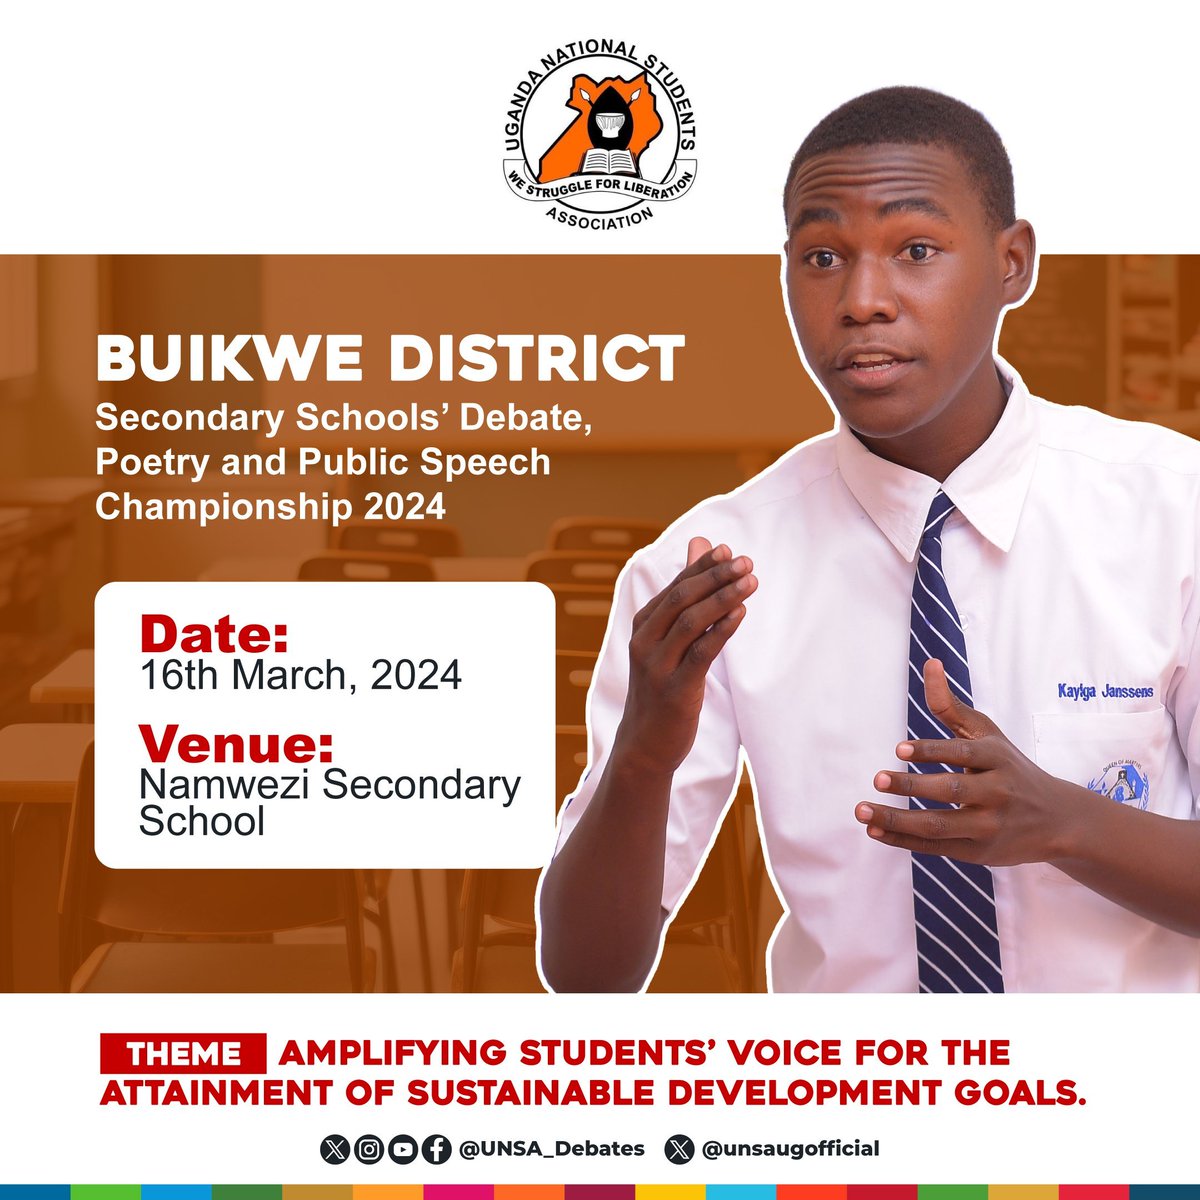 The Uganda Secondary Schools' Debate, Poetry, and Public Speech Championship (#USSDPSC24) by @unsaugofficial is scheduled for Buikwe District for its inaugural District Competition, aiming to commit to #LocalizingSDGs and empowering youth voices across Uganda.
Admin: @kat_festo